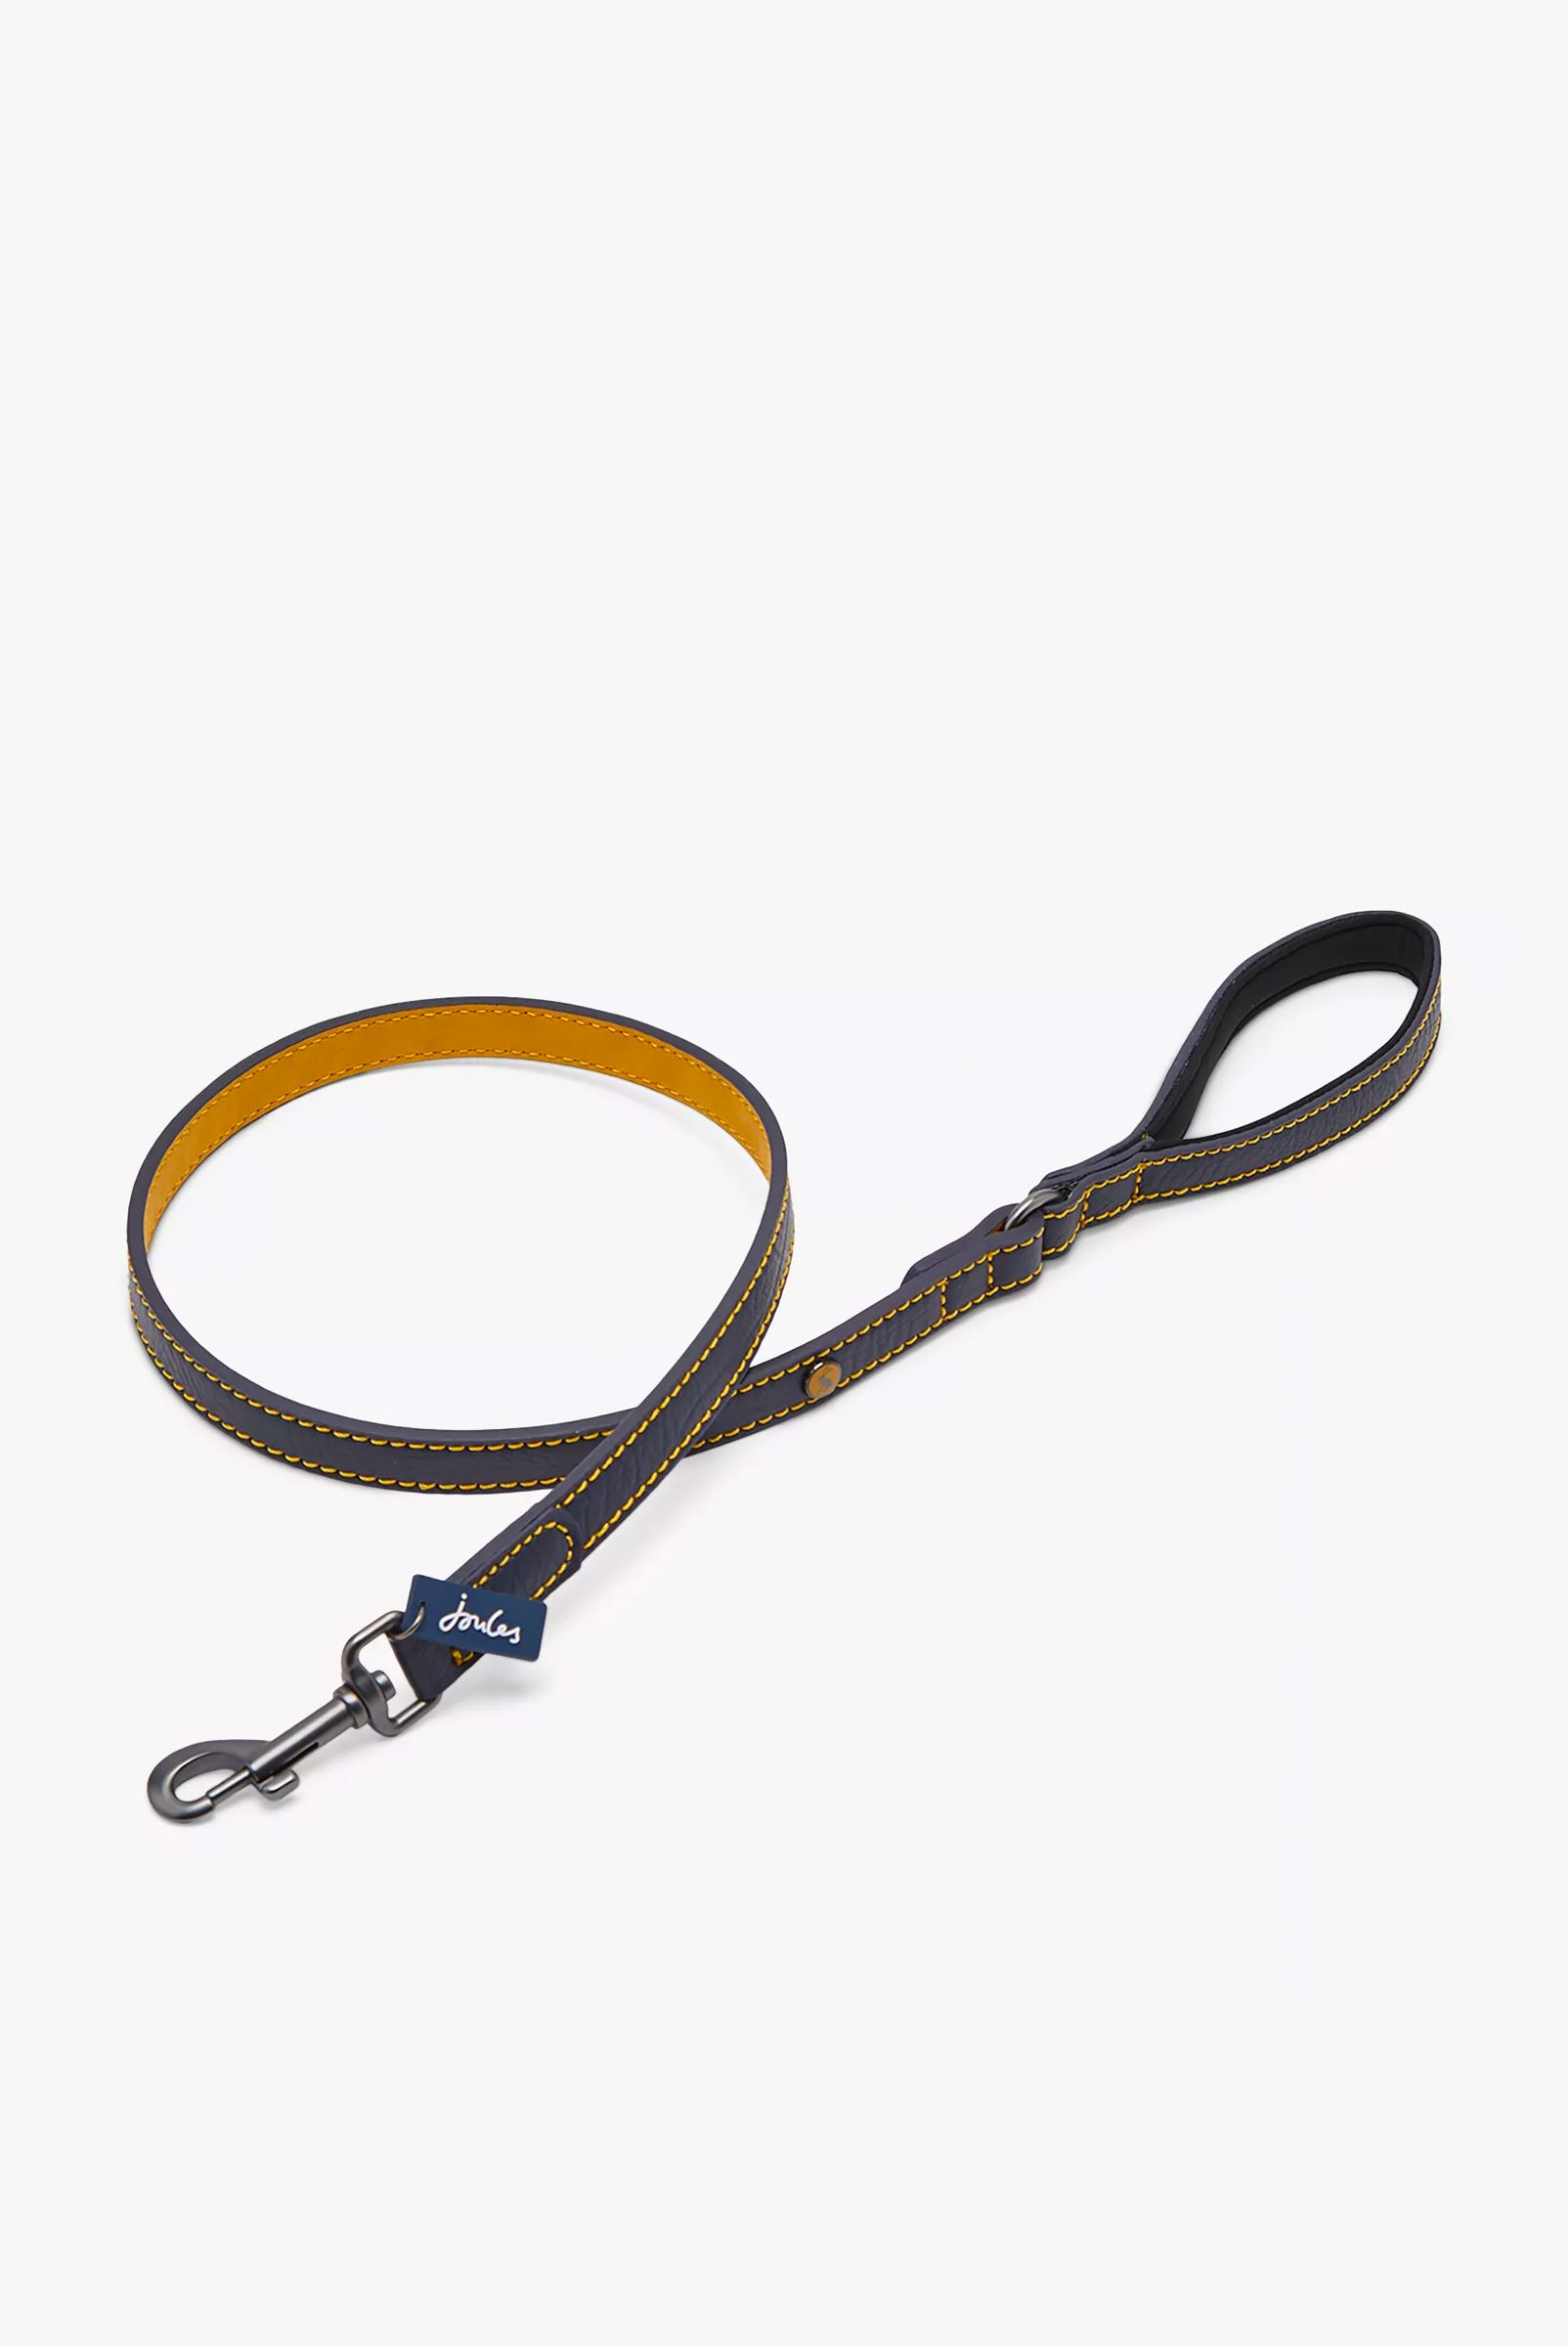 Joules Plain Leather Dog Lead, Navy, £19